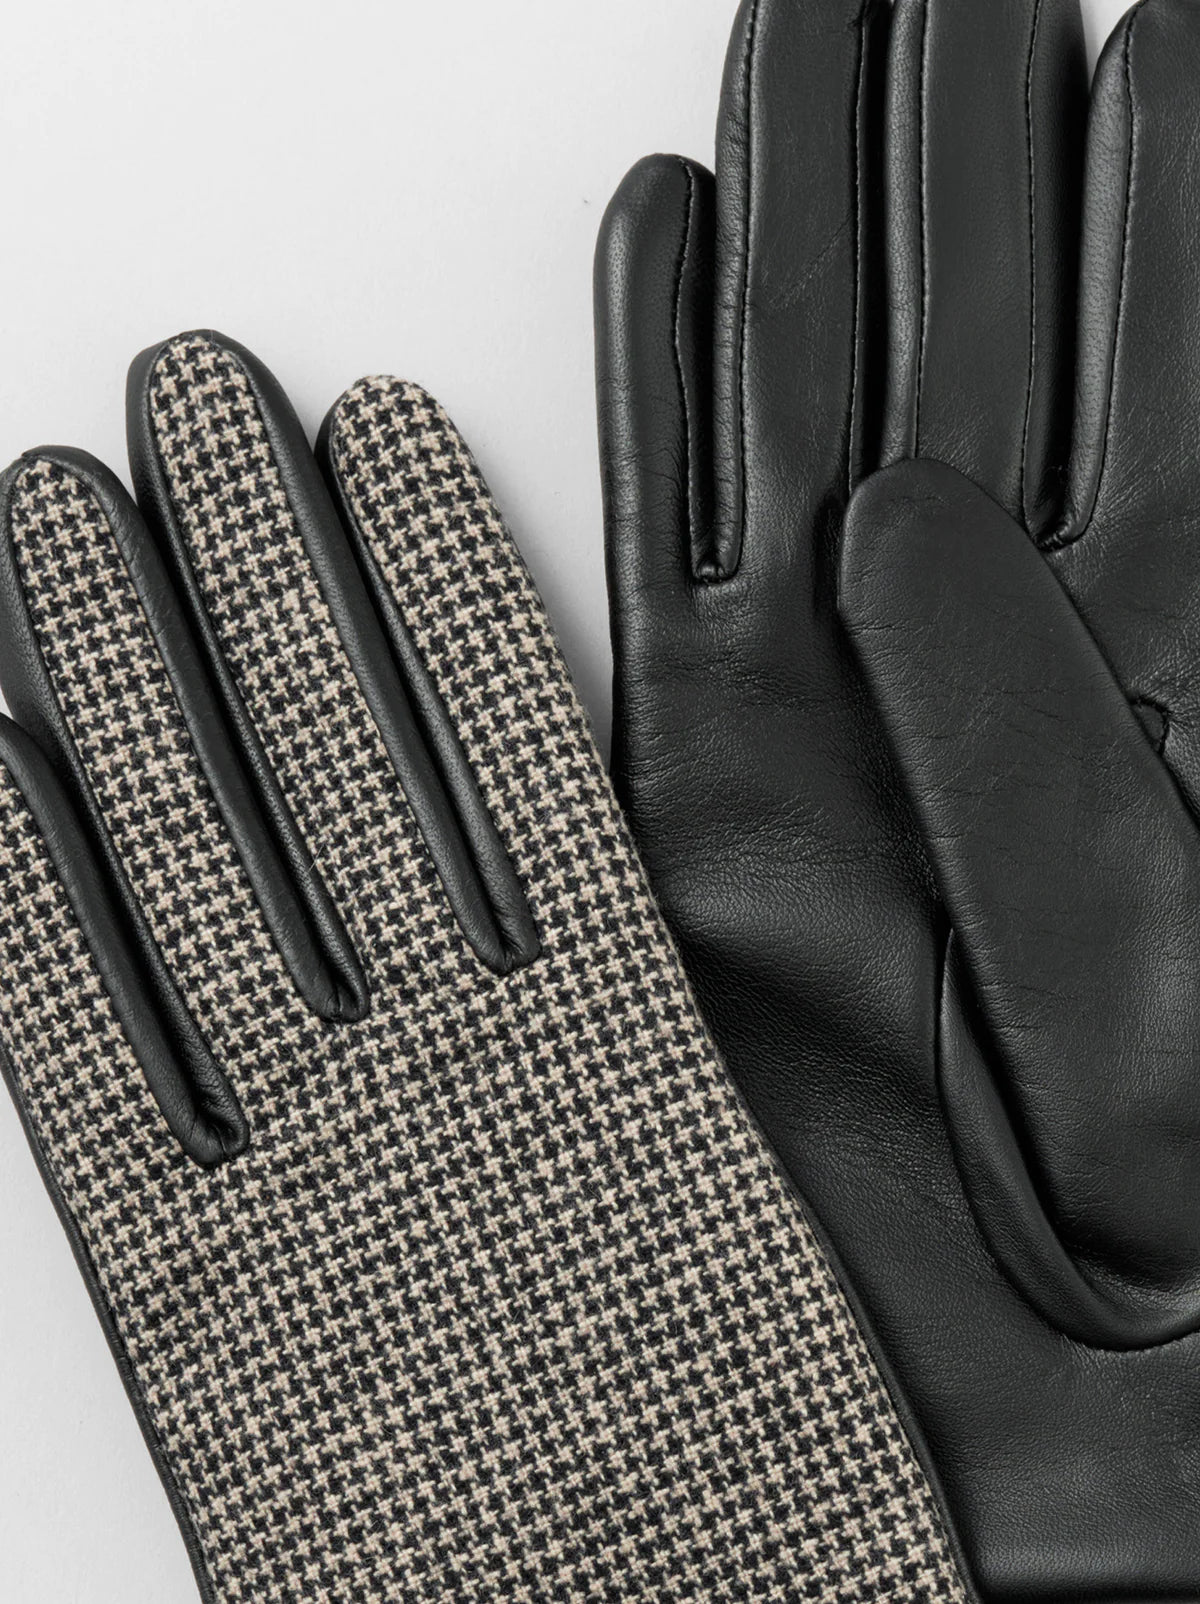 Arts-and-Science-combi-glove-black-amarees